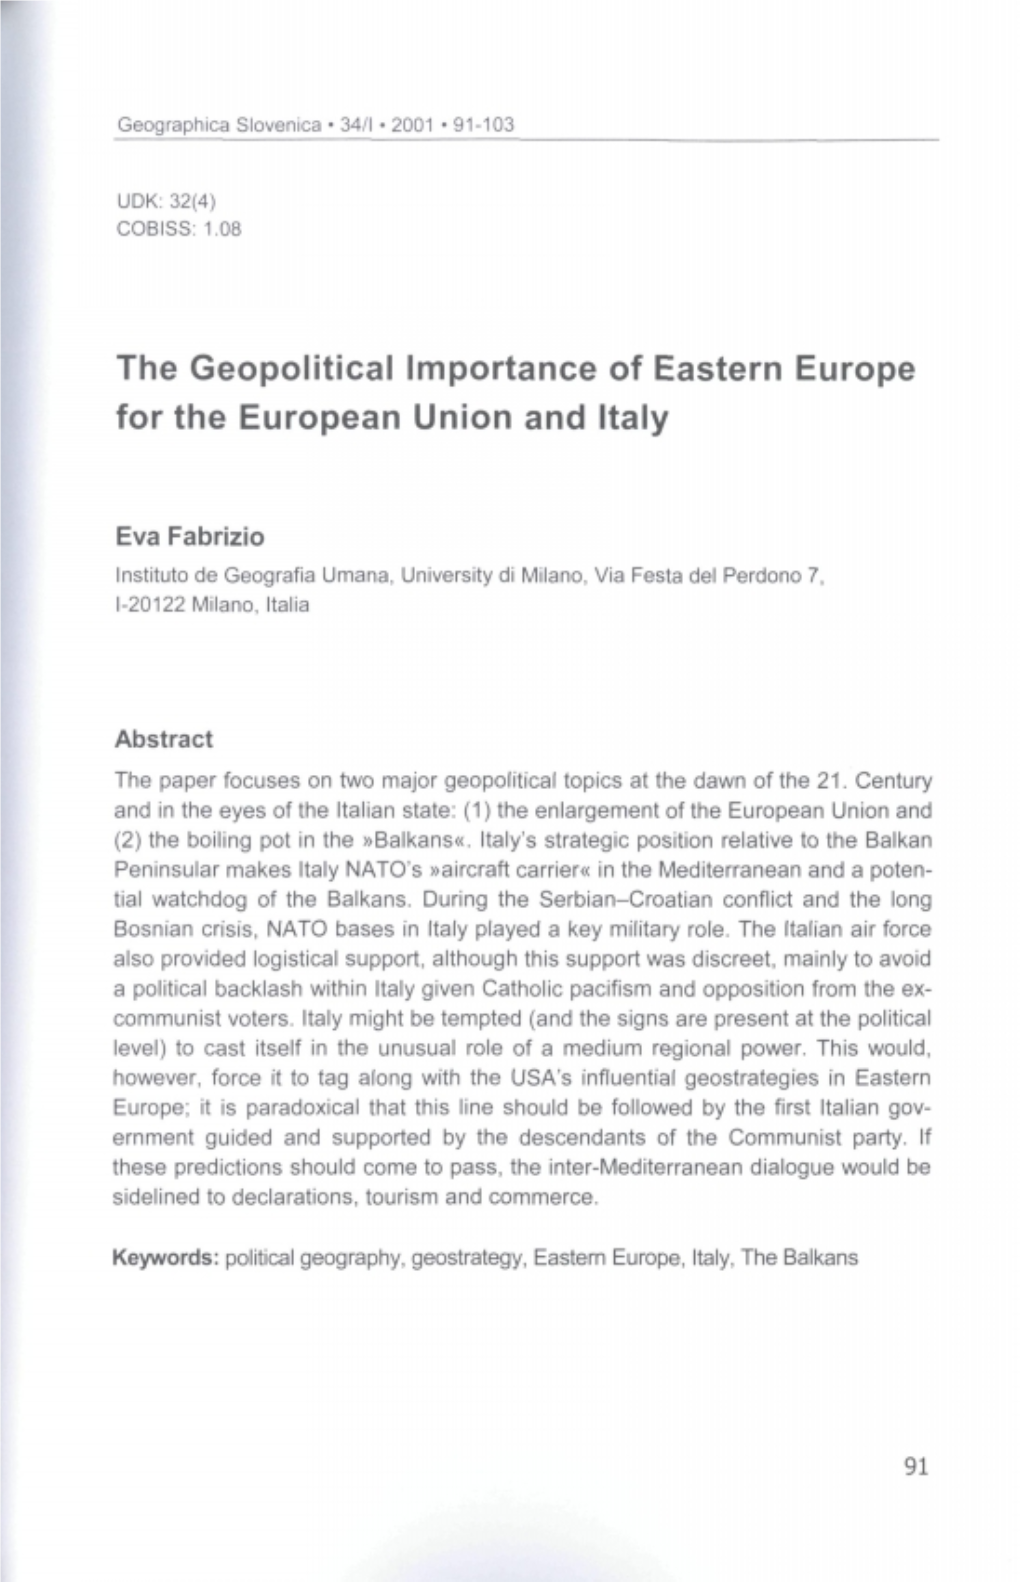 The Geopolitical Importance of Eastern Europe for the European Union and Italy